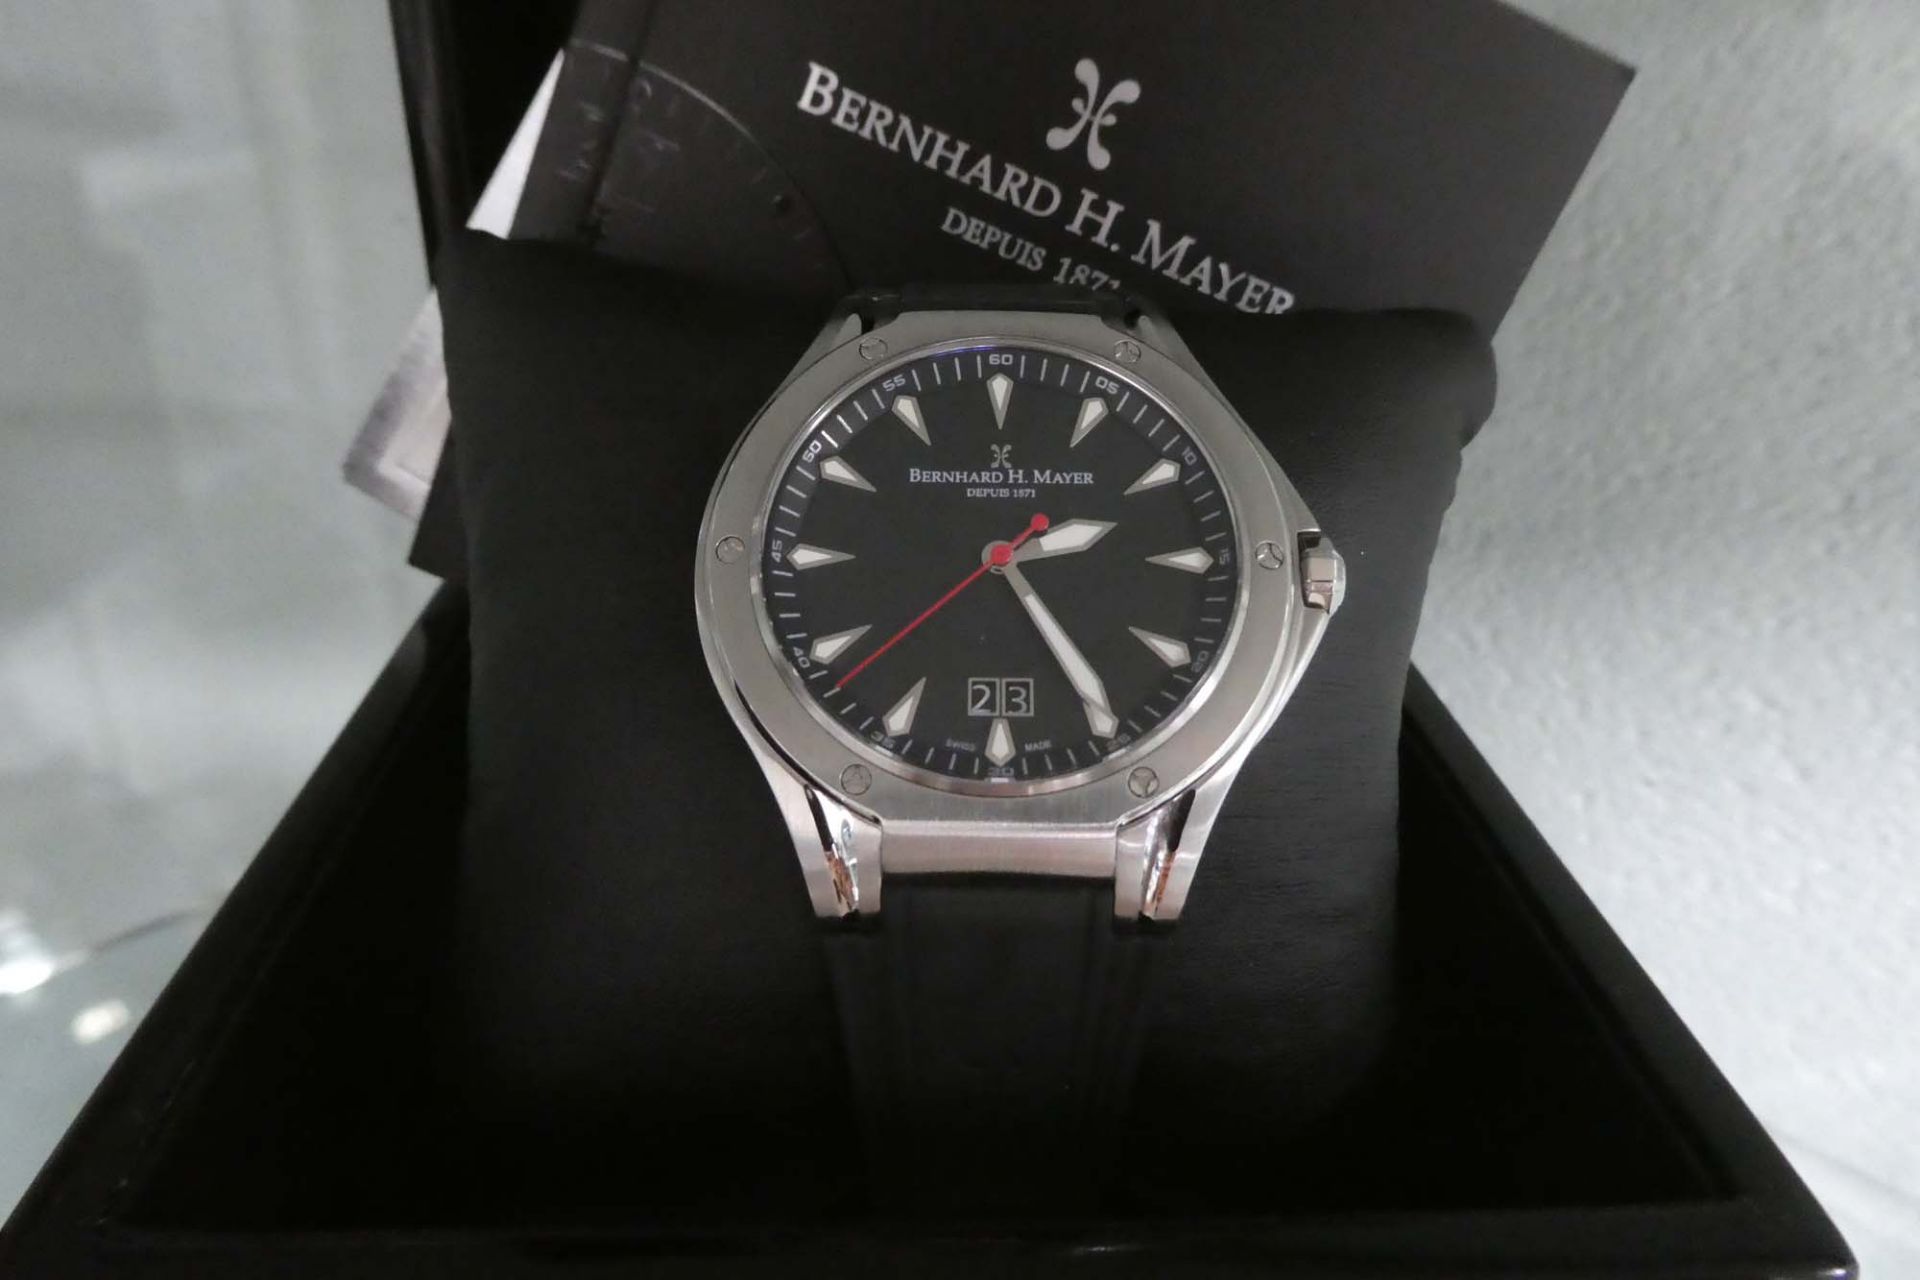 Bernhard H. Meyer watch with box, manual and case - Image 2 of 2